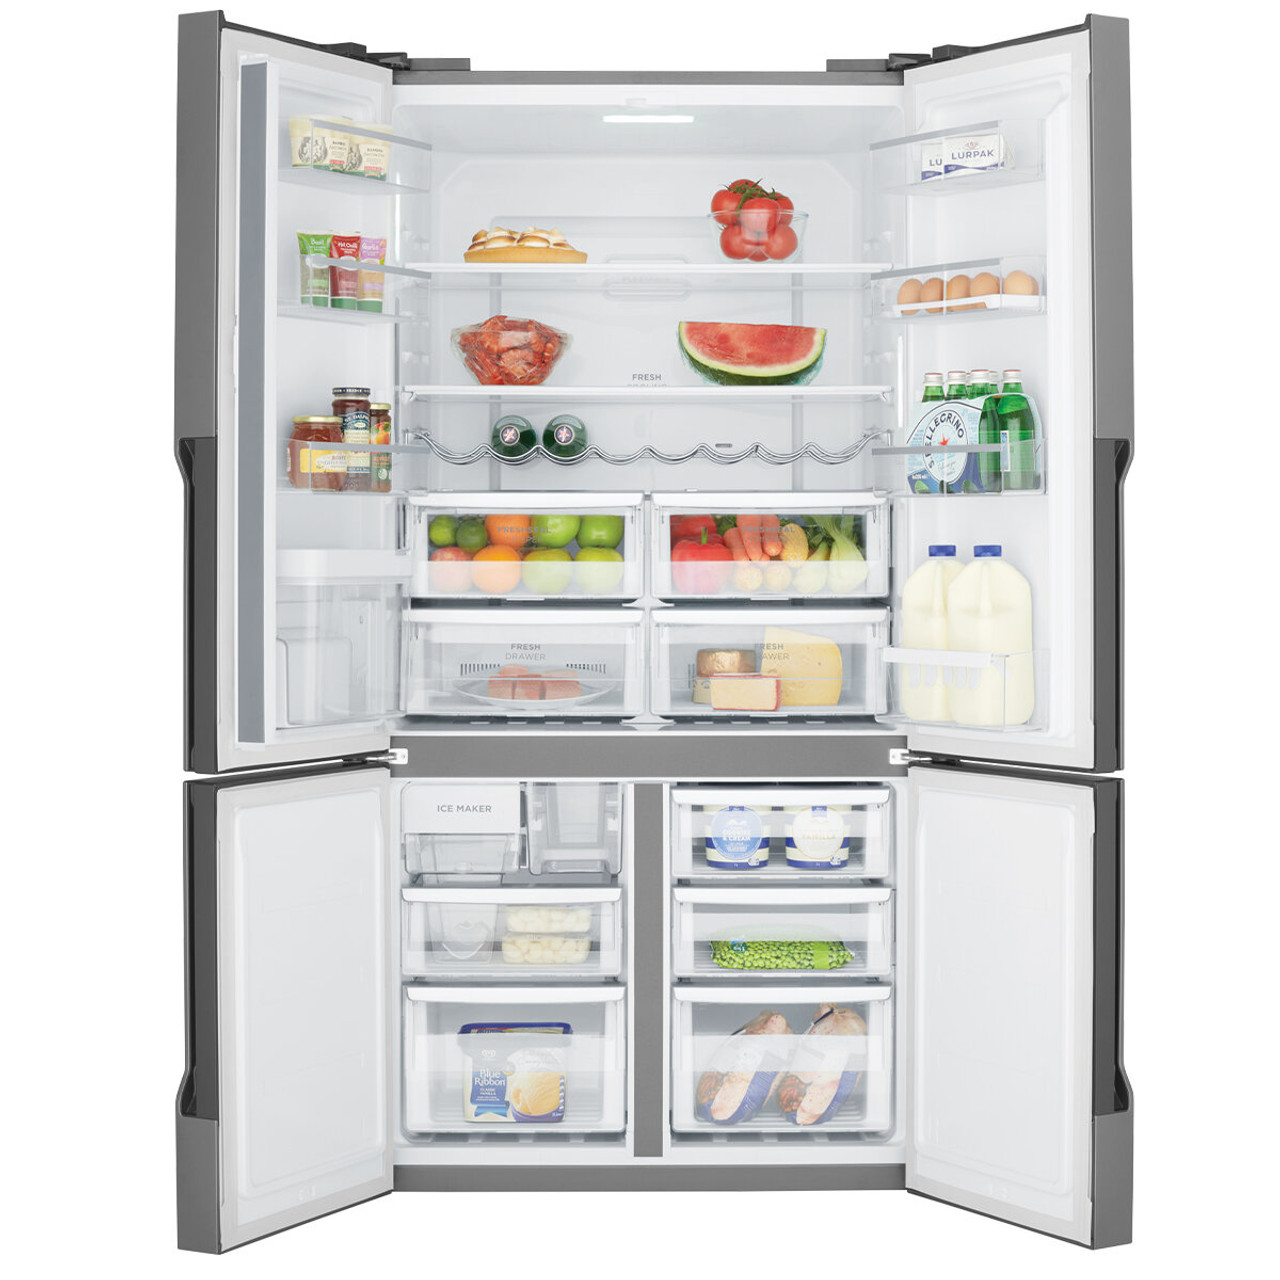 WQE5660SA – 564L French Quad Door Fridge with Water Dispenser – Stainless Steel